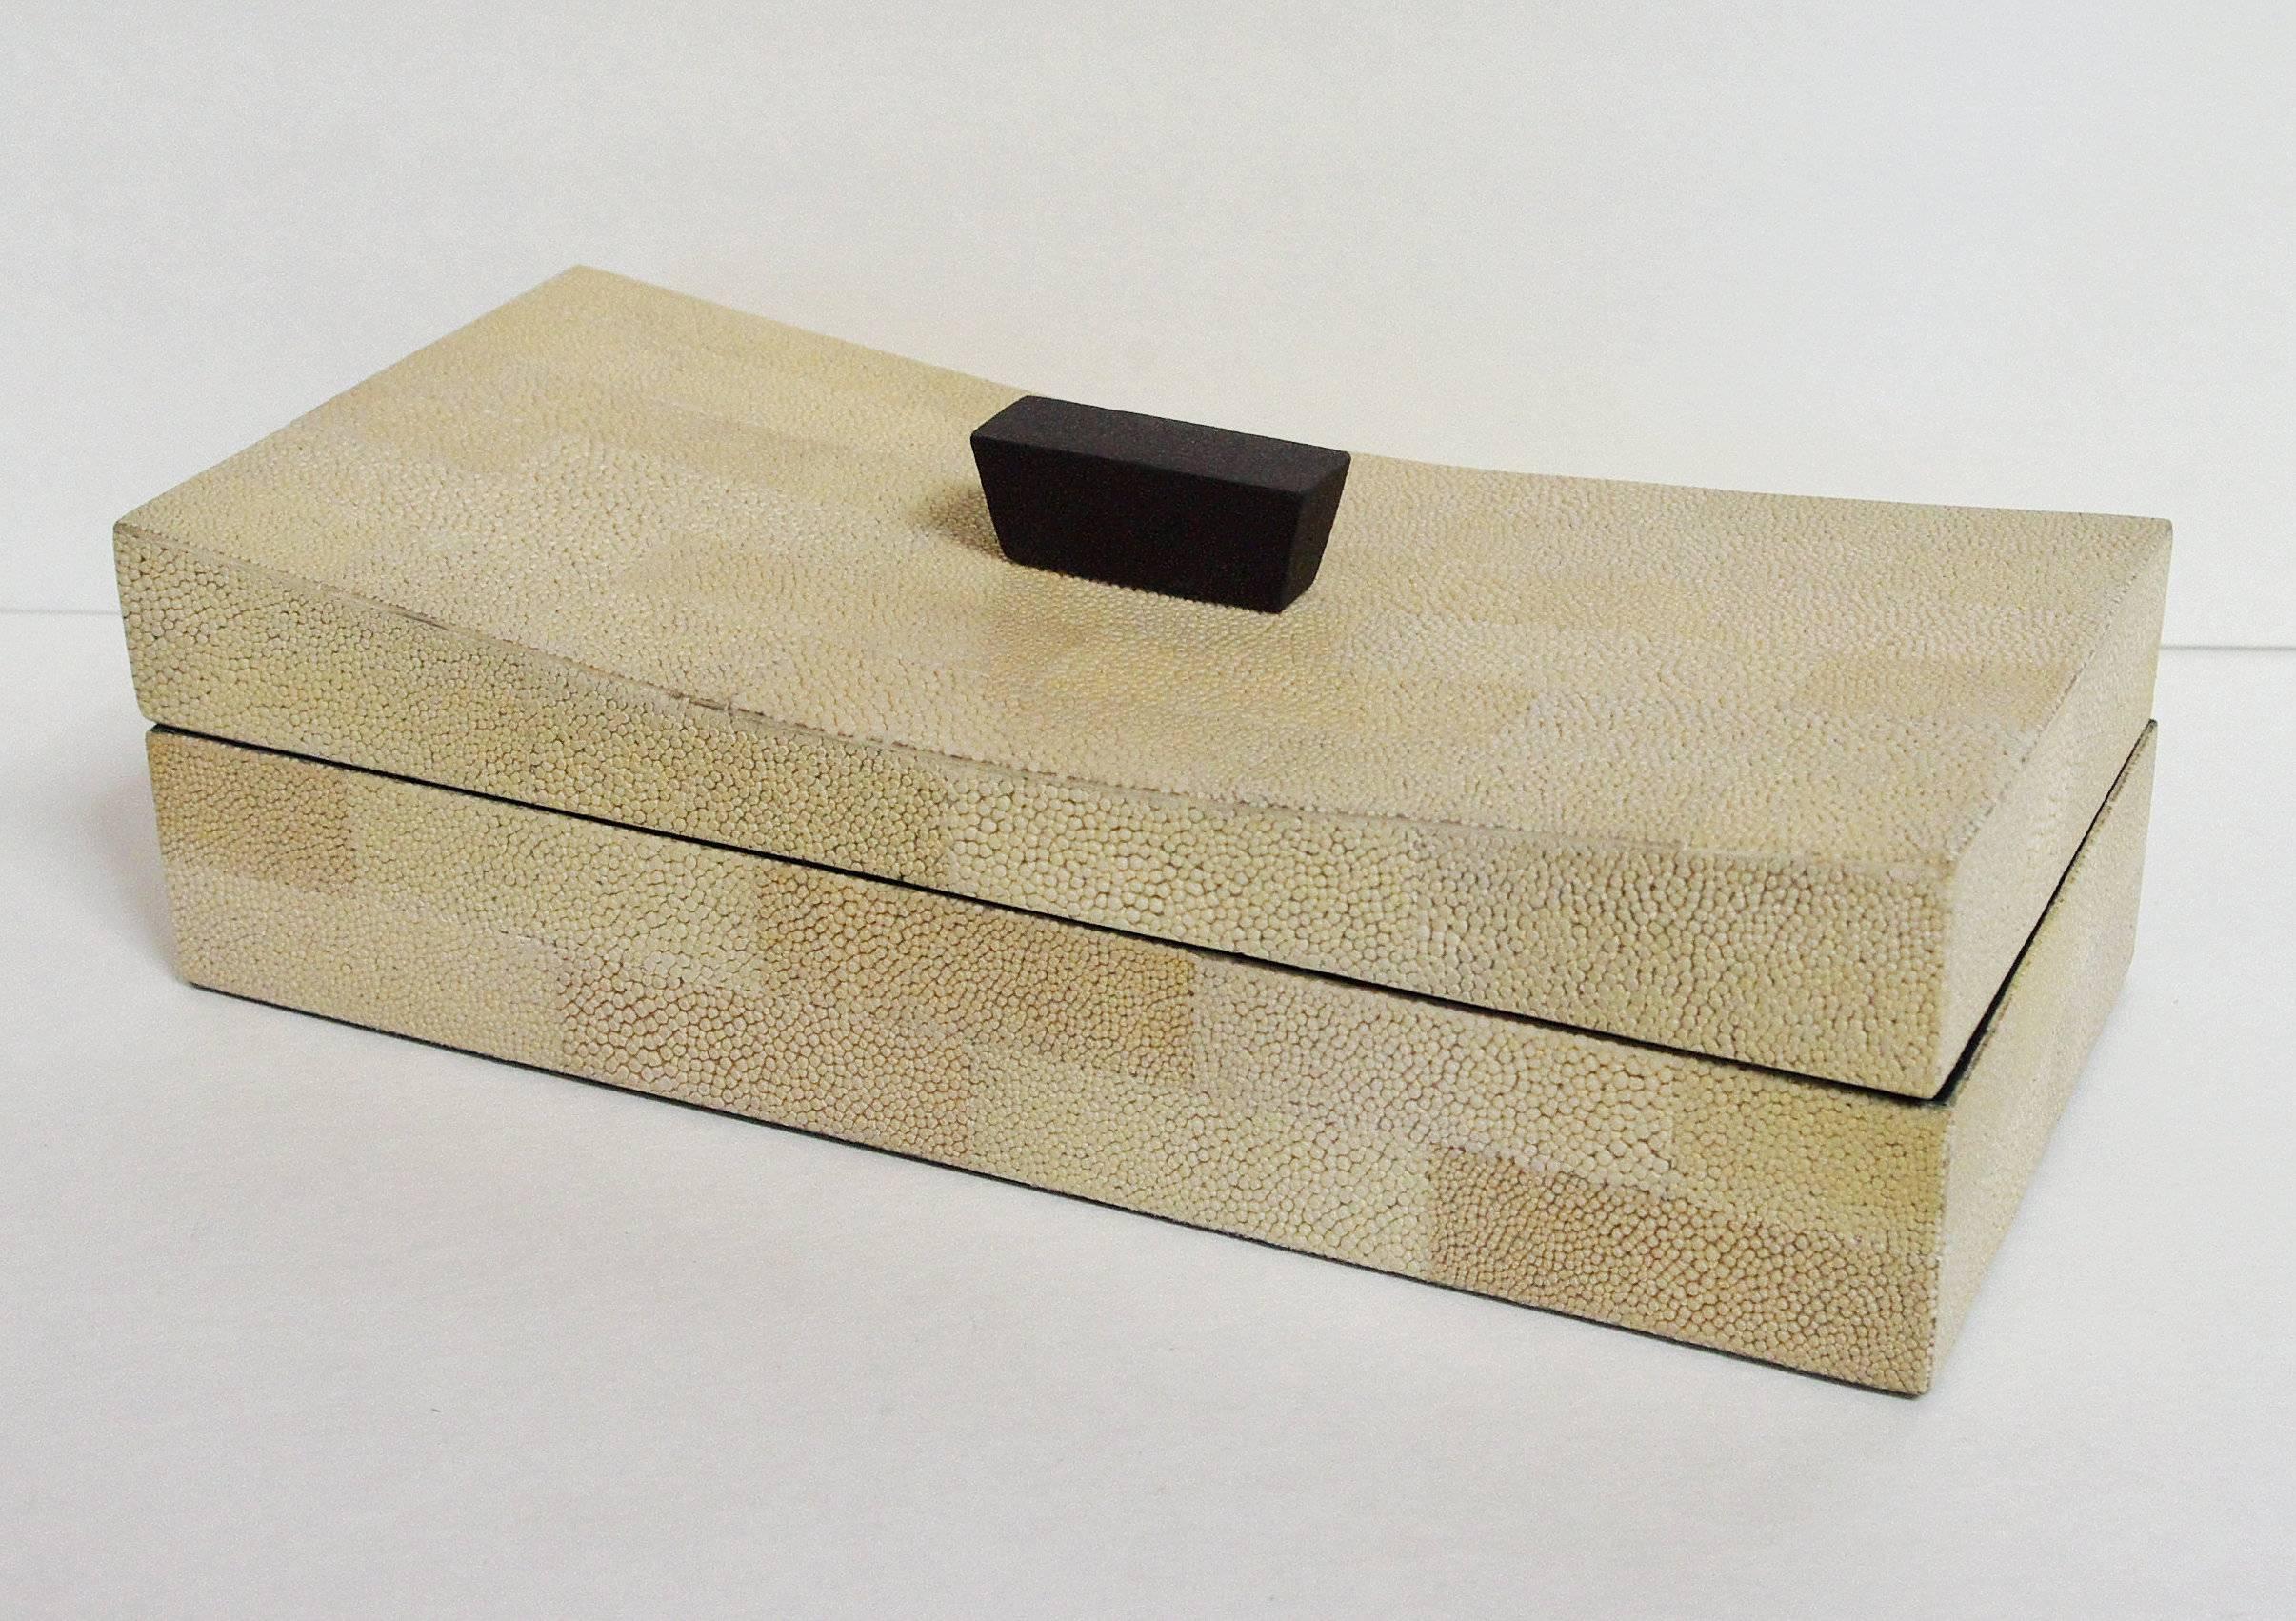 Beige shagreen box with curved lid
Measures: Depth 6 inches, width 12 inches, height 4.5 inches
2 in stock in Palm Springs ON FINAL CLEARANCE SALE for $595 each!!! 
Order Reference #: FABIOLTD MR17
This piece makes for great and unique gift!
  